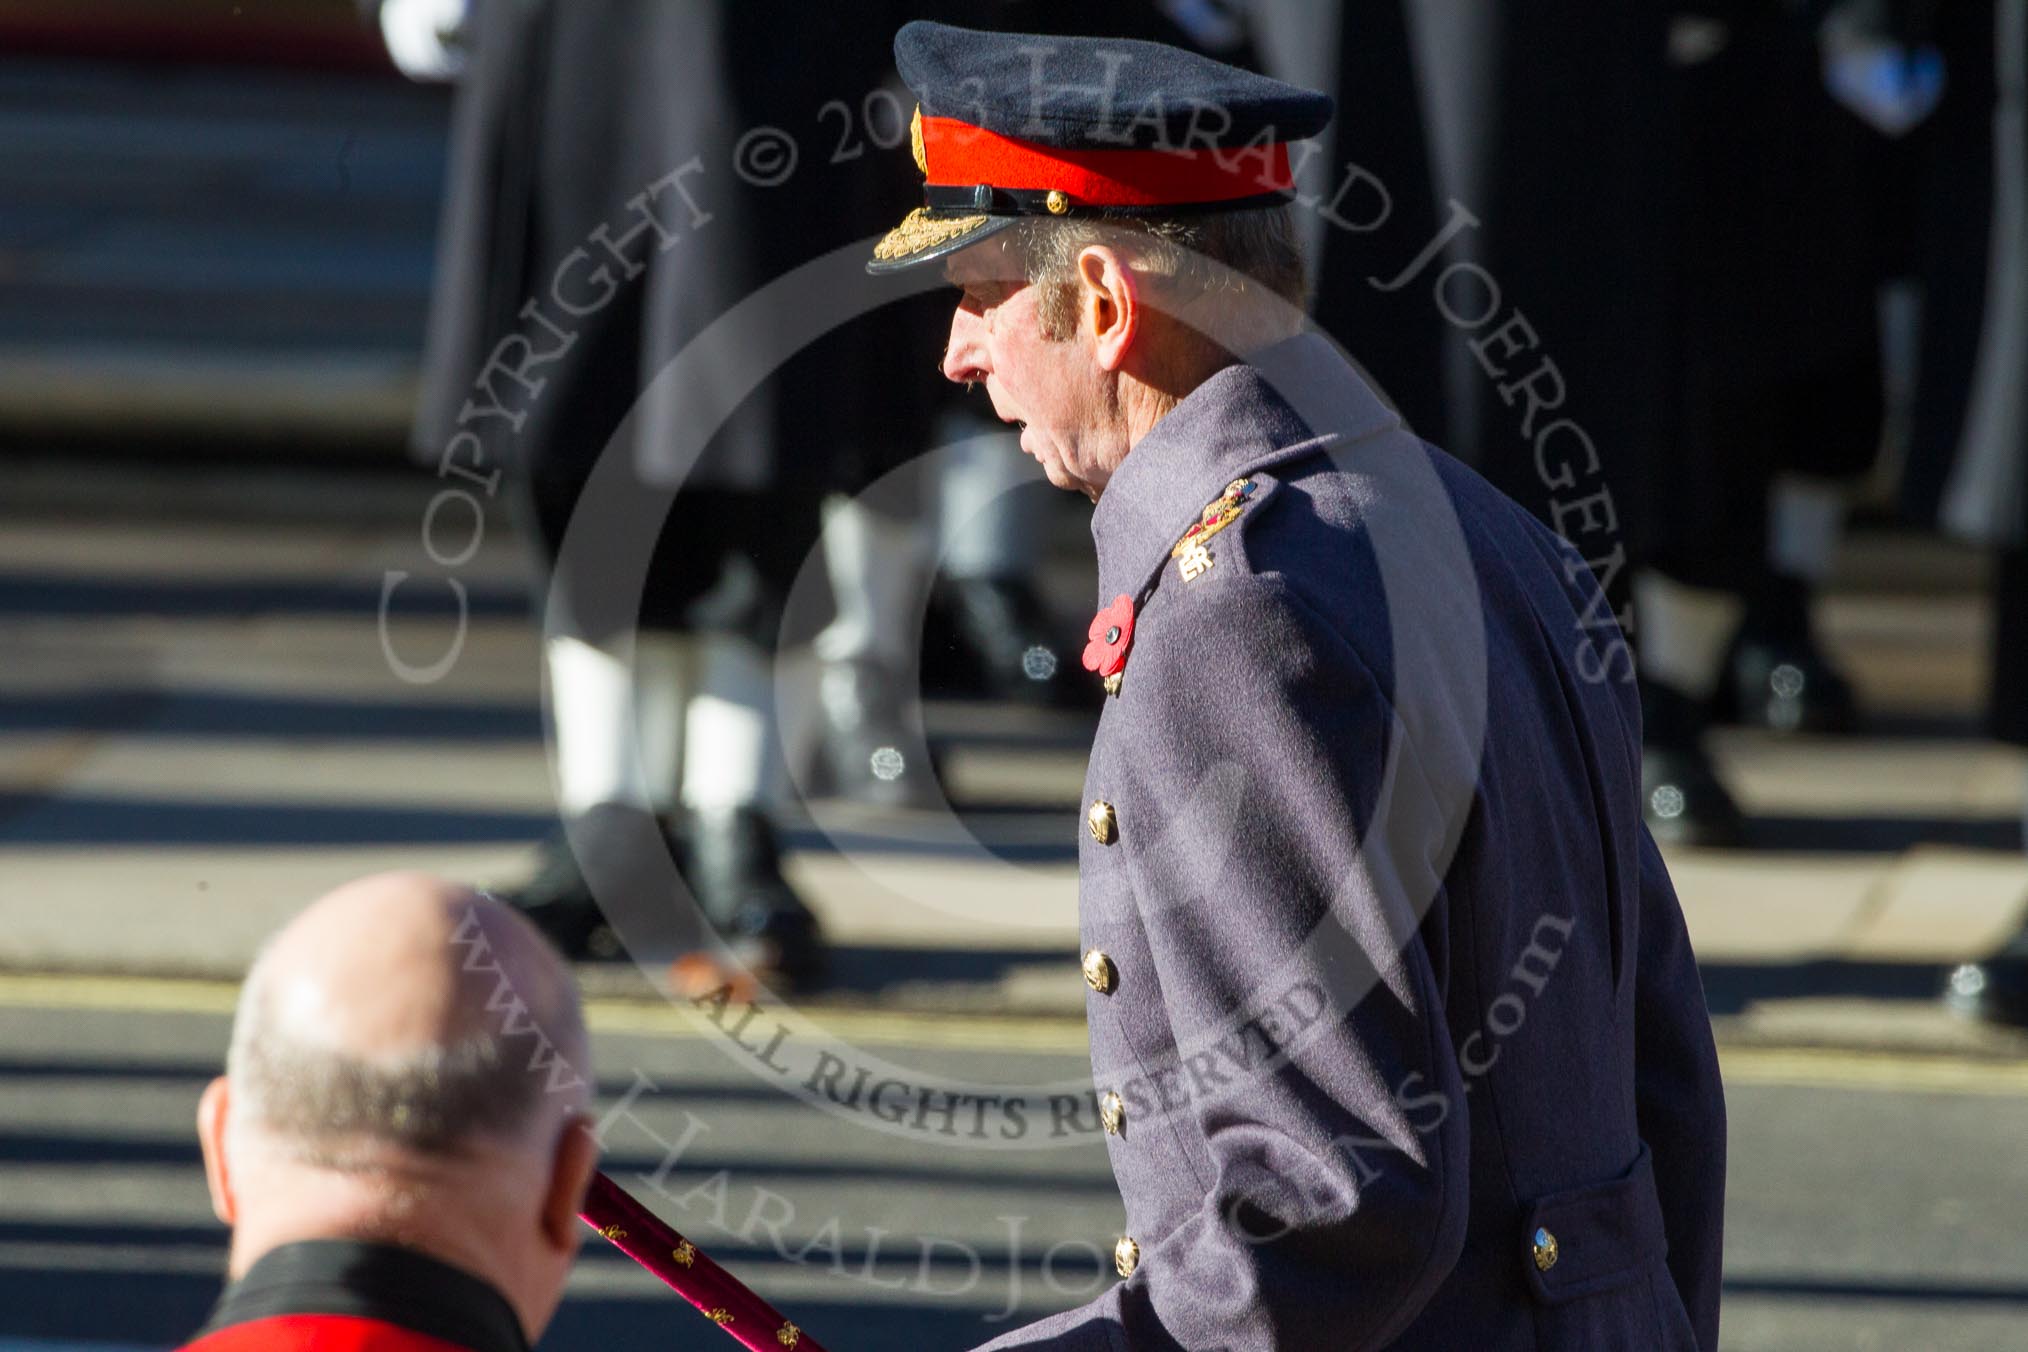 HRH The Duke of Kent, bowing in respect after having laid his wreaths at the Cenotaph.